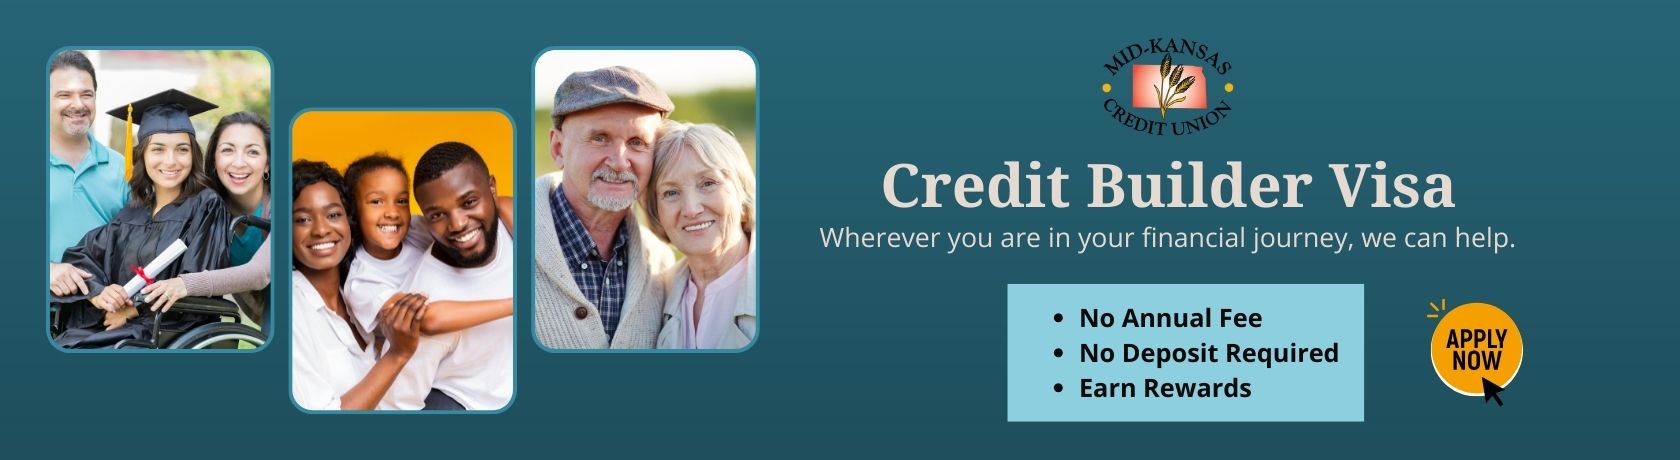 CREDIT BUILDER VISA. WHEREVER YOU ARE IN YOUR FINANCIAL JOURNEY, WE CAN HELP. NO ANNUAL FEE, NO DEPOSIT REQUIRED. EARN REWARDS.